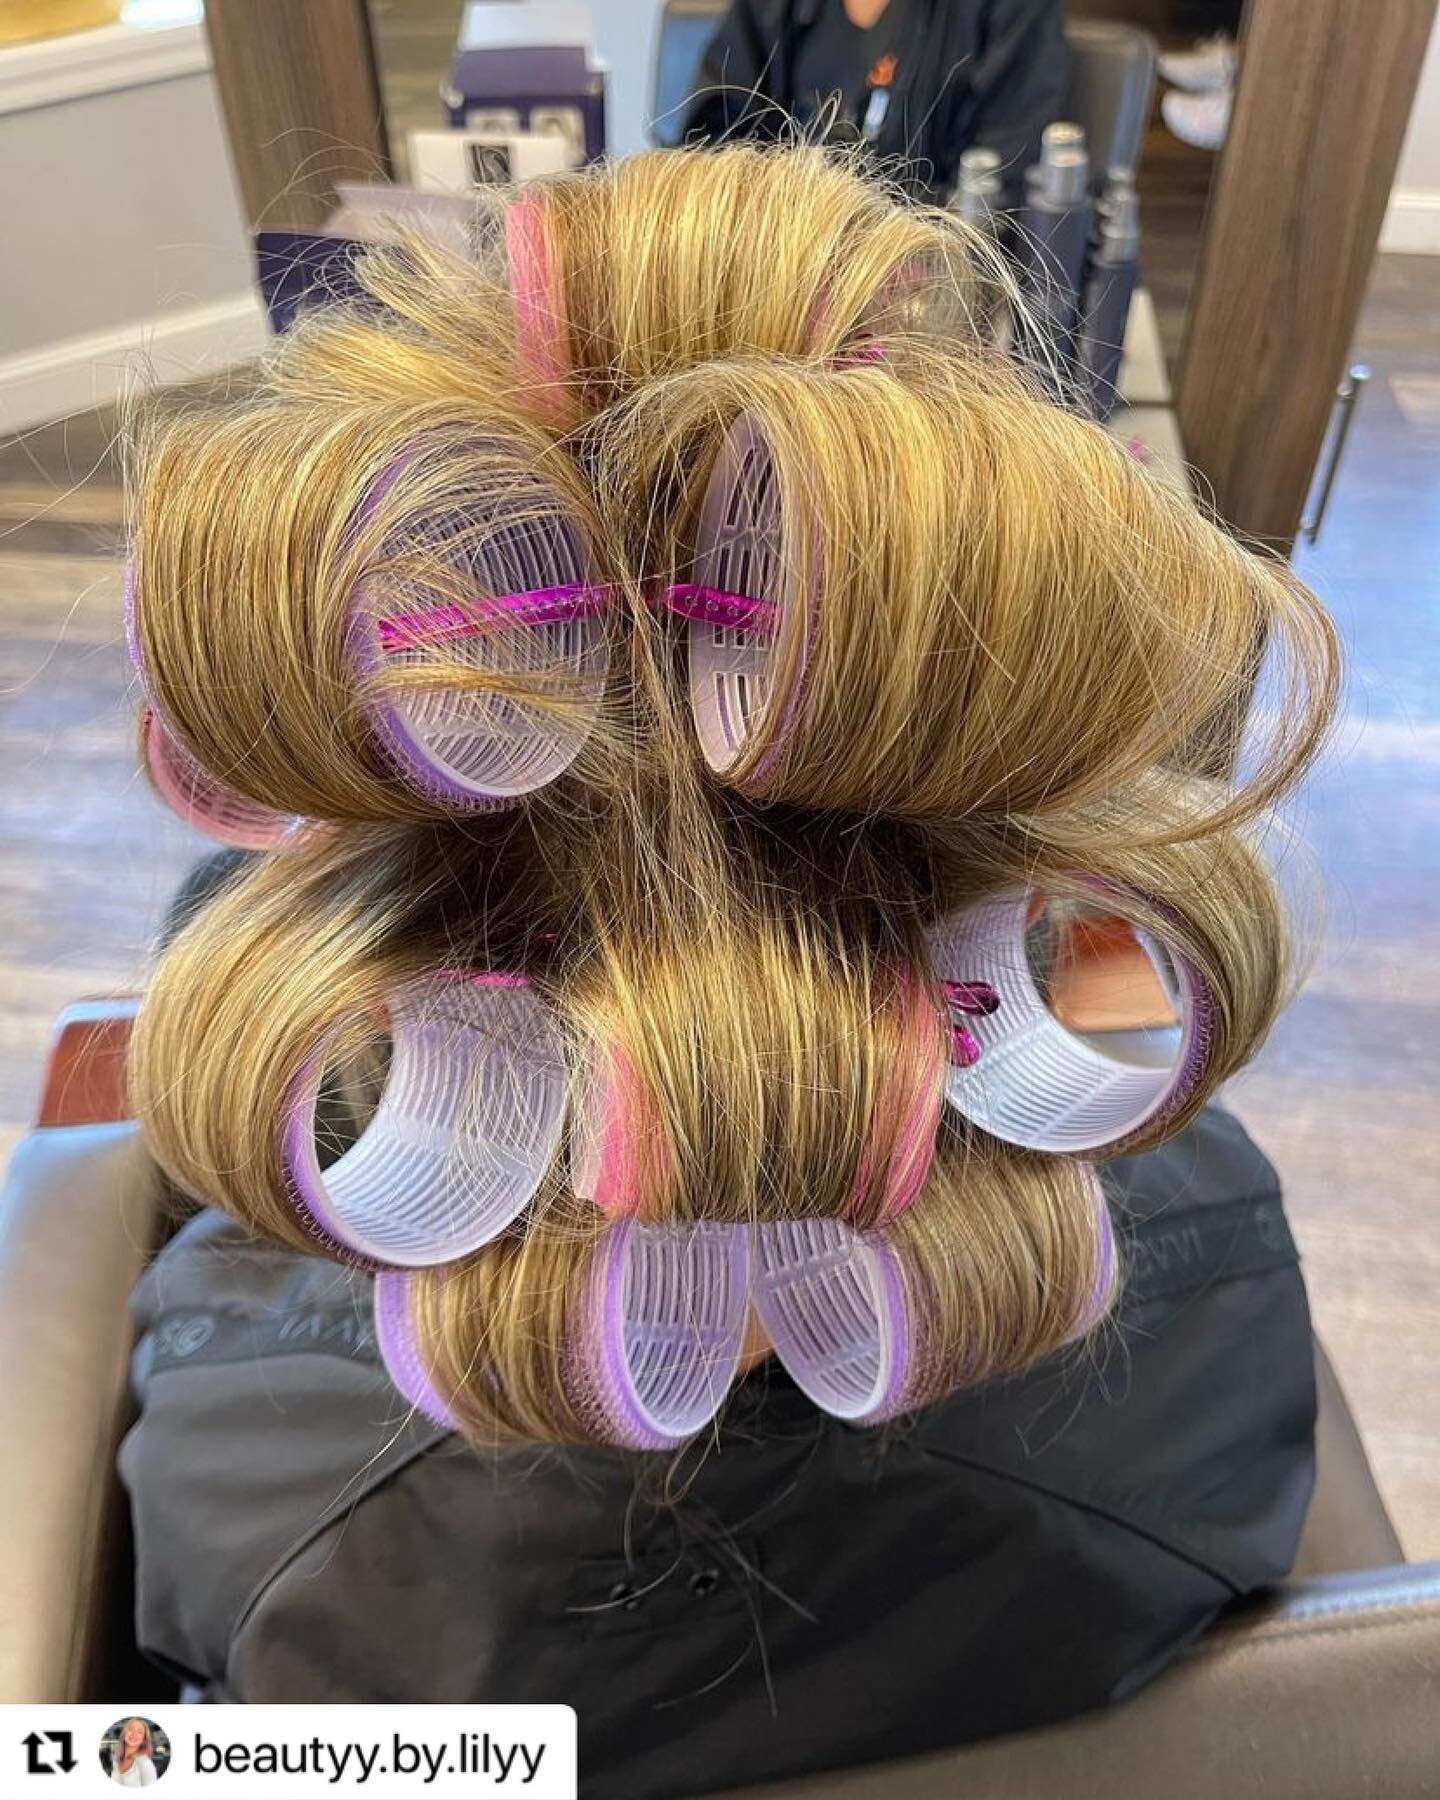 Bouncy blowout vibes✨
 
By new talent stylist @beautyy.by.lilyy 🤍

Styling products used: @euforainternational Behave, Sculpture &amp; Illuminate 🌱
&bull;
&bull;
&bull;
#eufora #euforainternational #kjs #katherinejonsalon #portjeff #portjeffstation